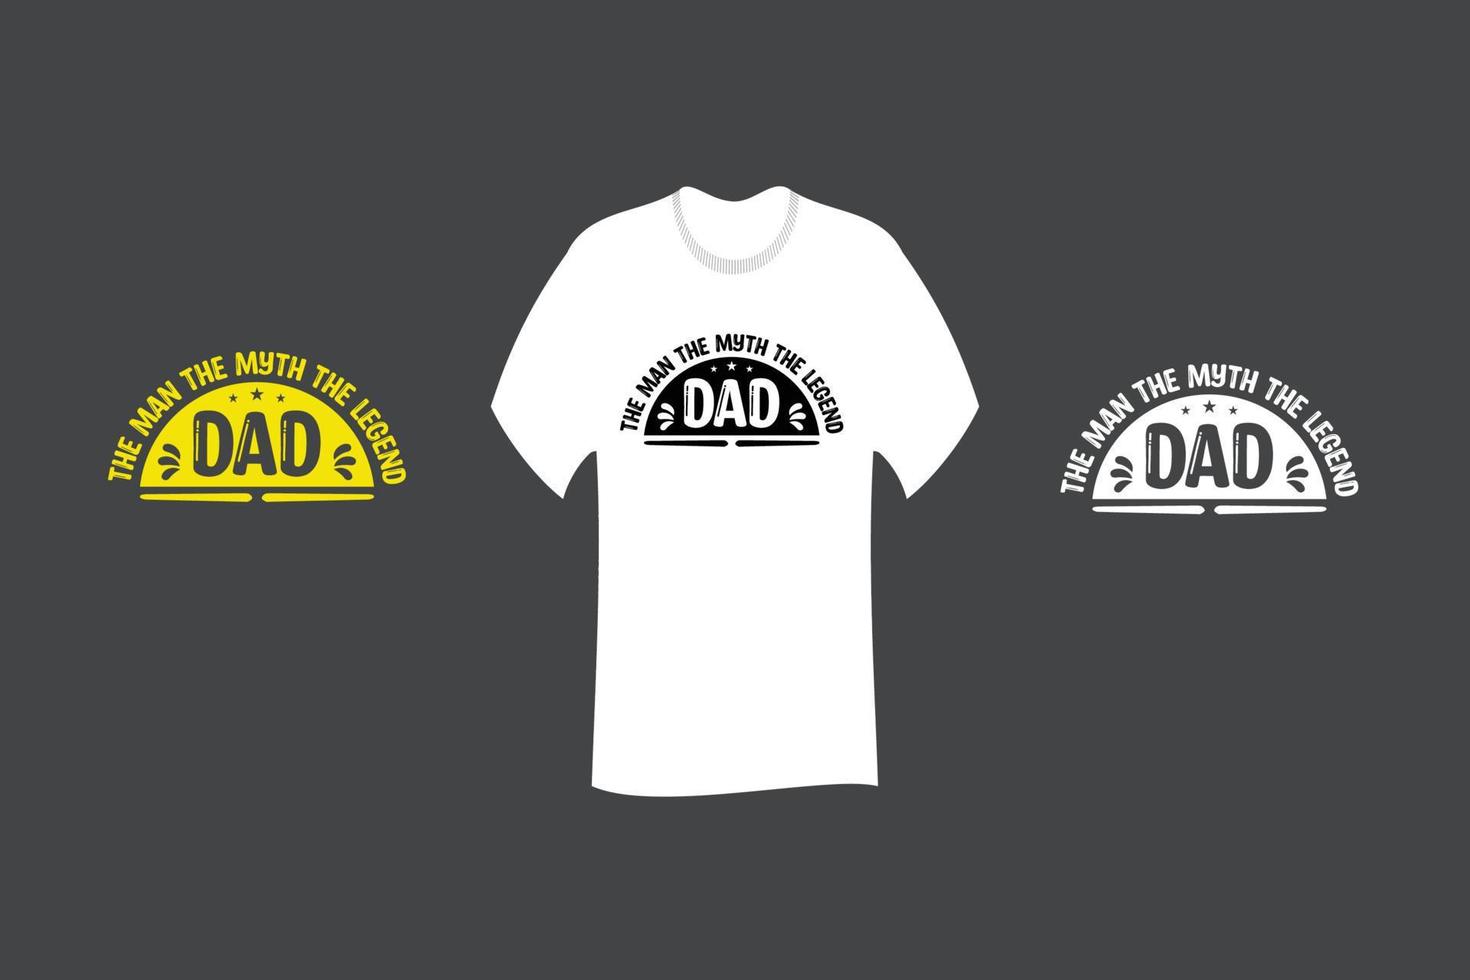 Dad The Man The Myth the Legend T Shirt Design vector